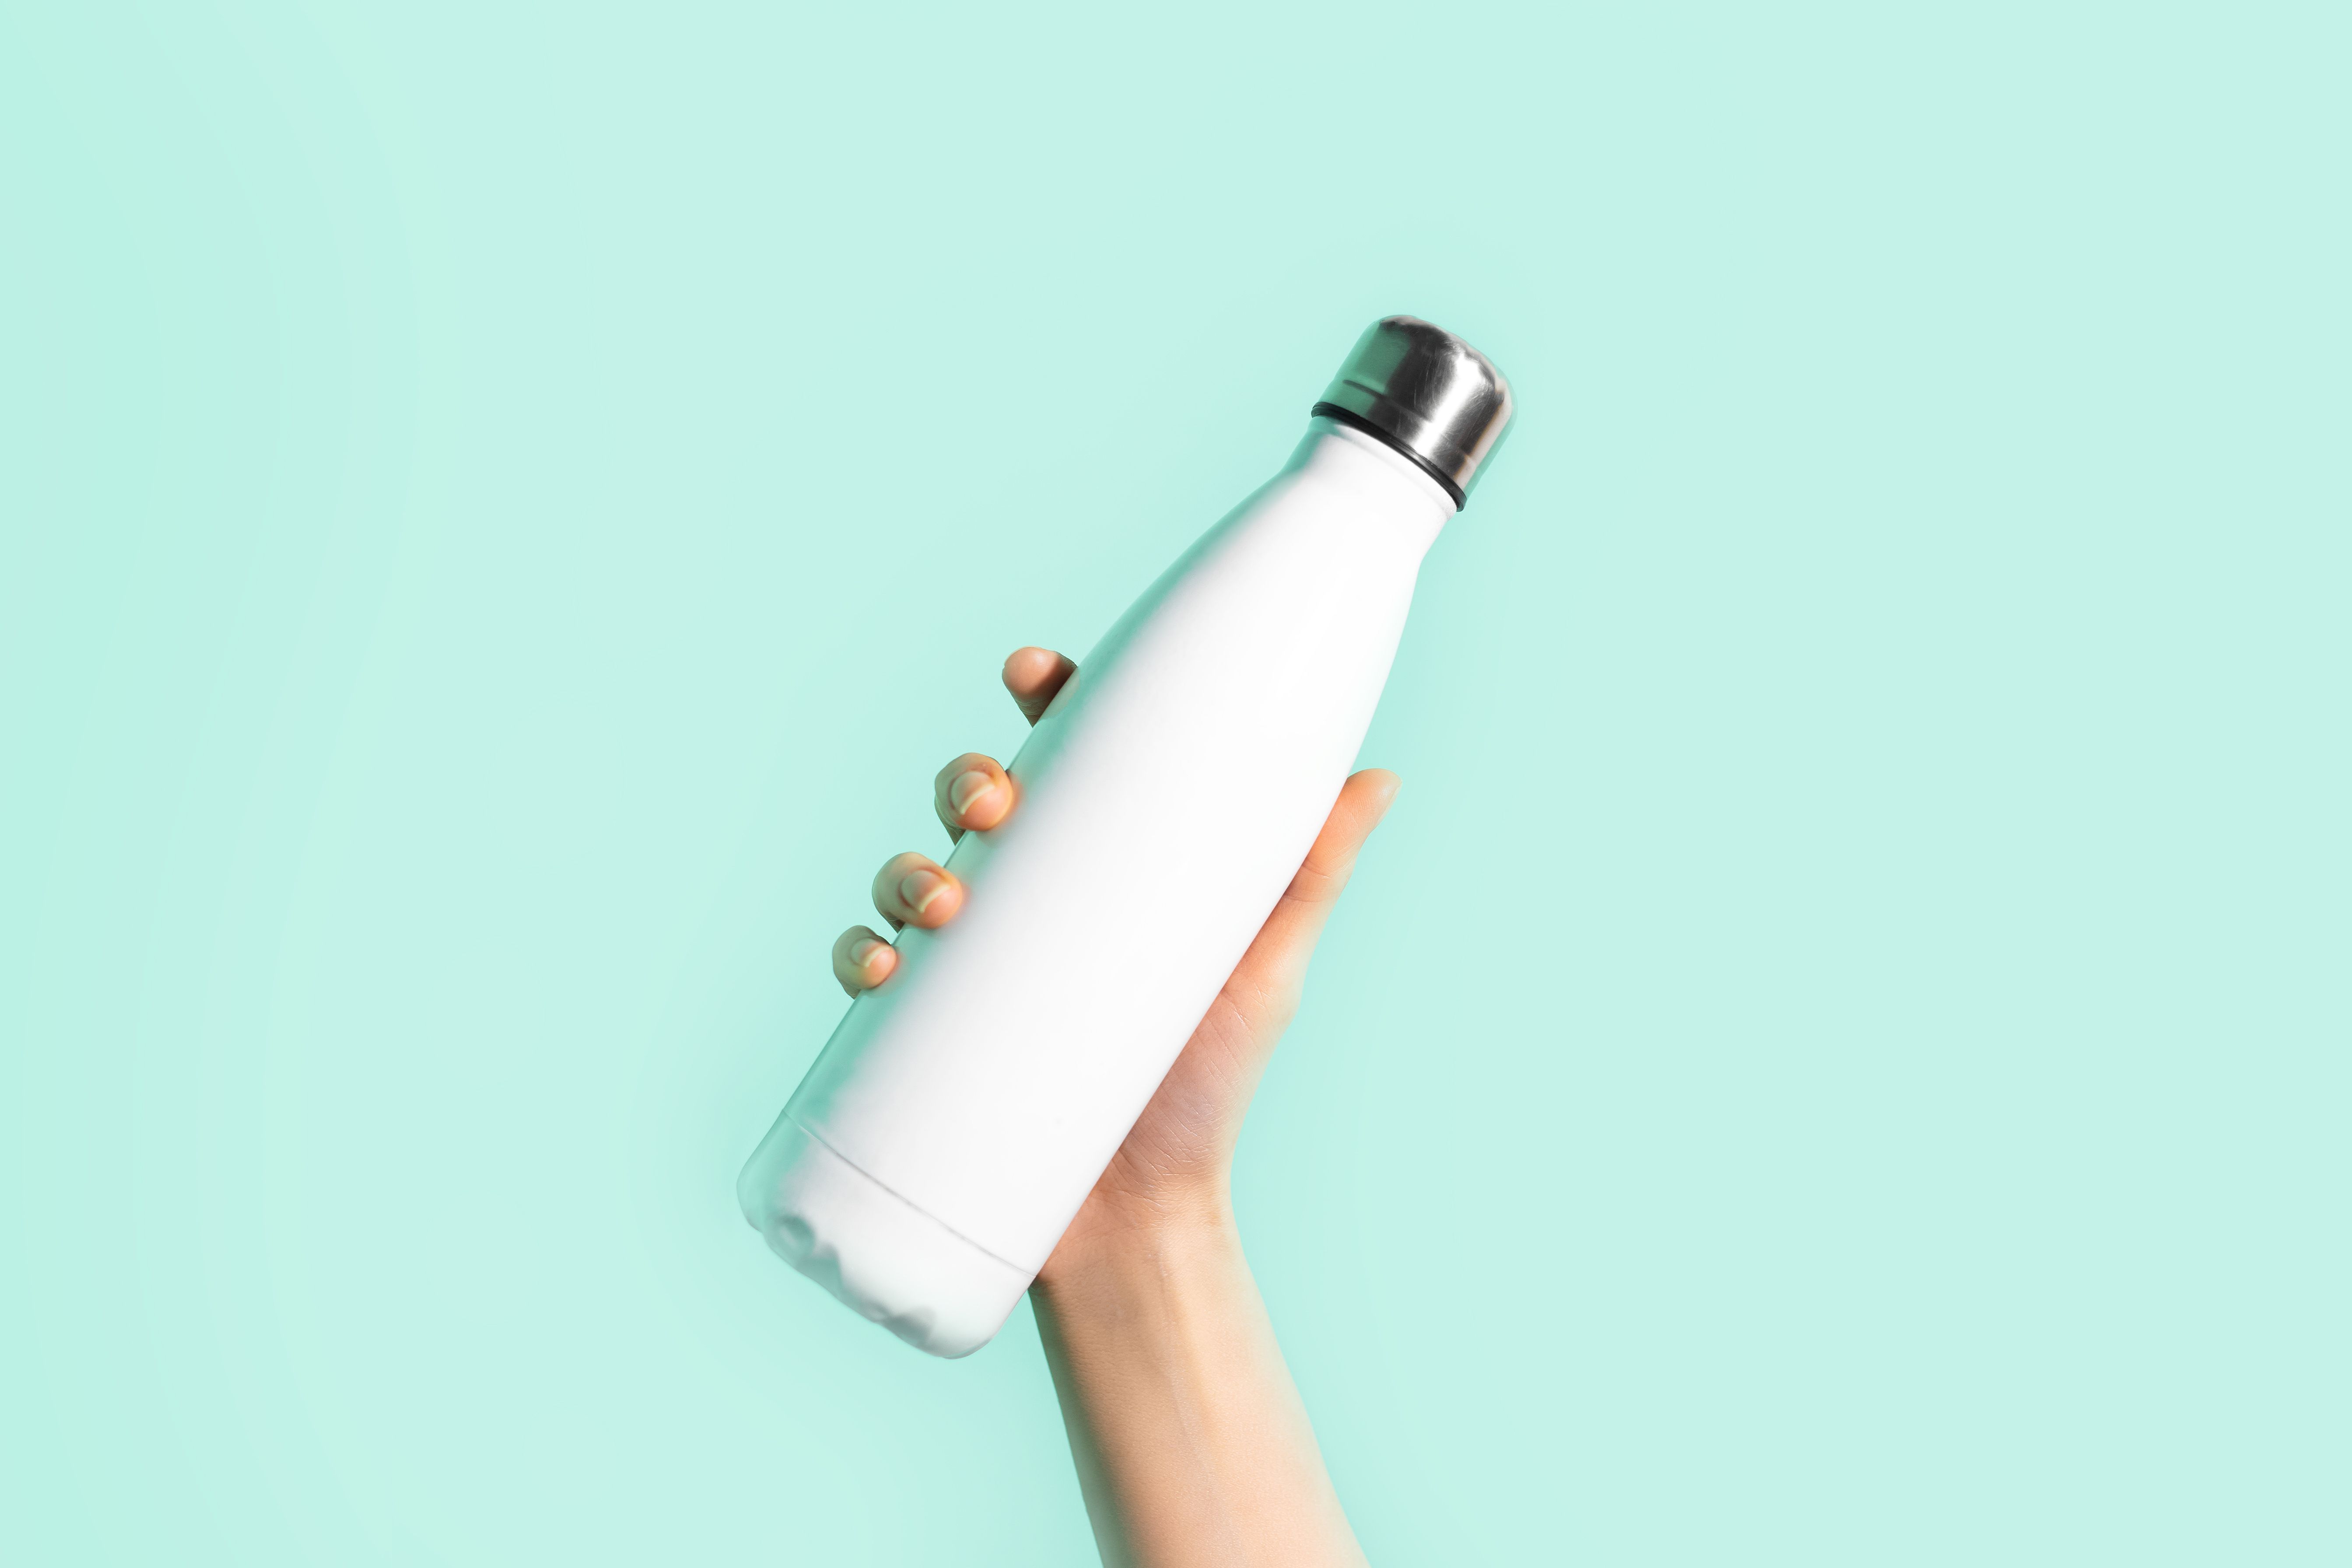 How To Clean a Reusable Water Bottle - No More Germs!